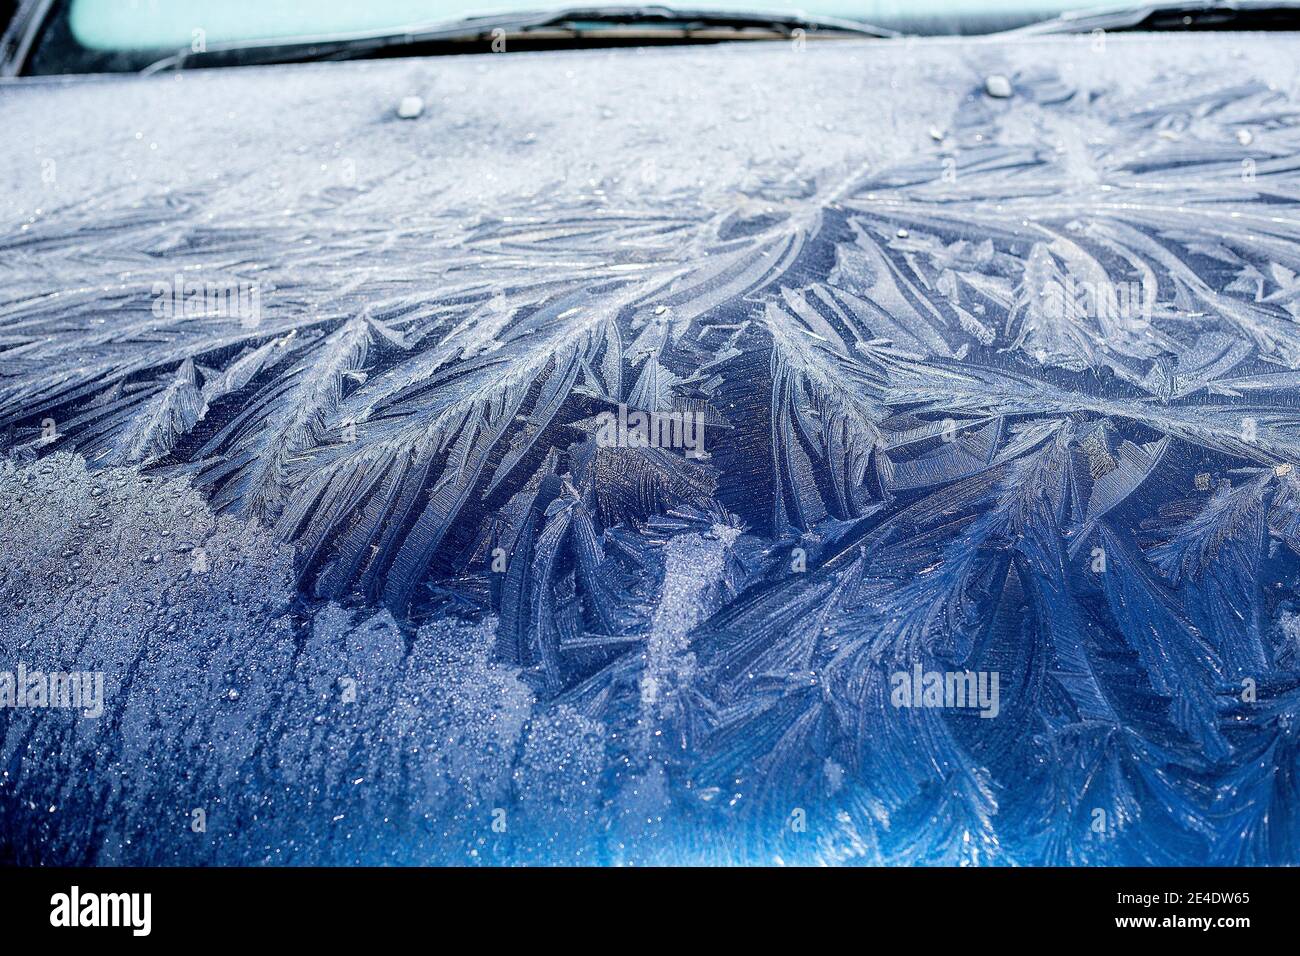 A thick, patterned, frost on the windscreen and bonnet (hood) of a blue Ford Mondeo car. Stock Photo